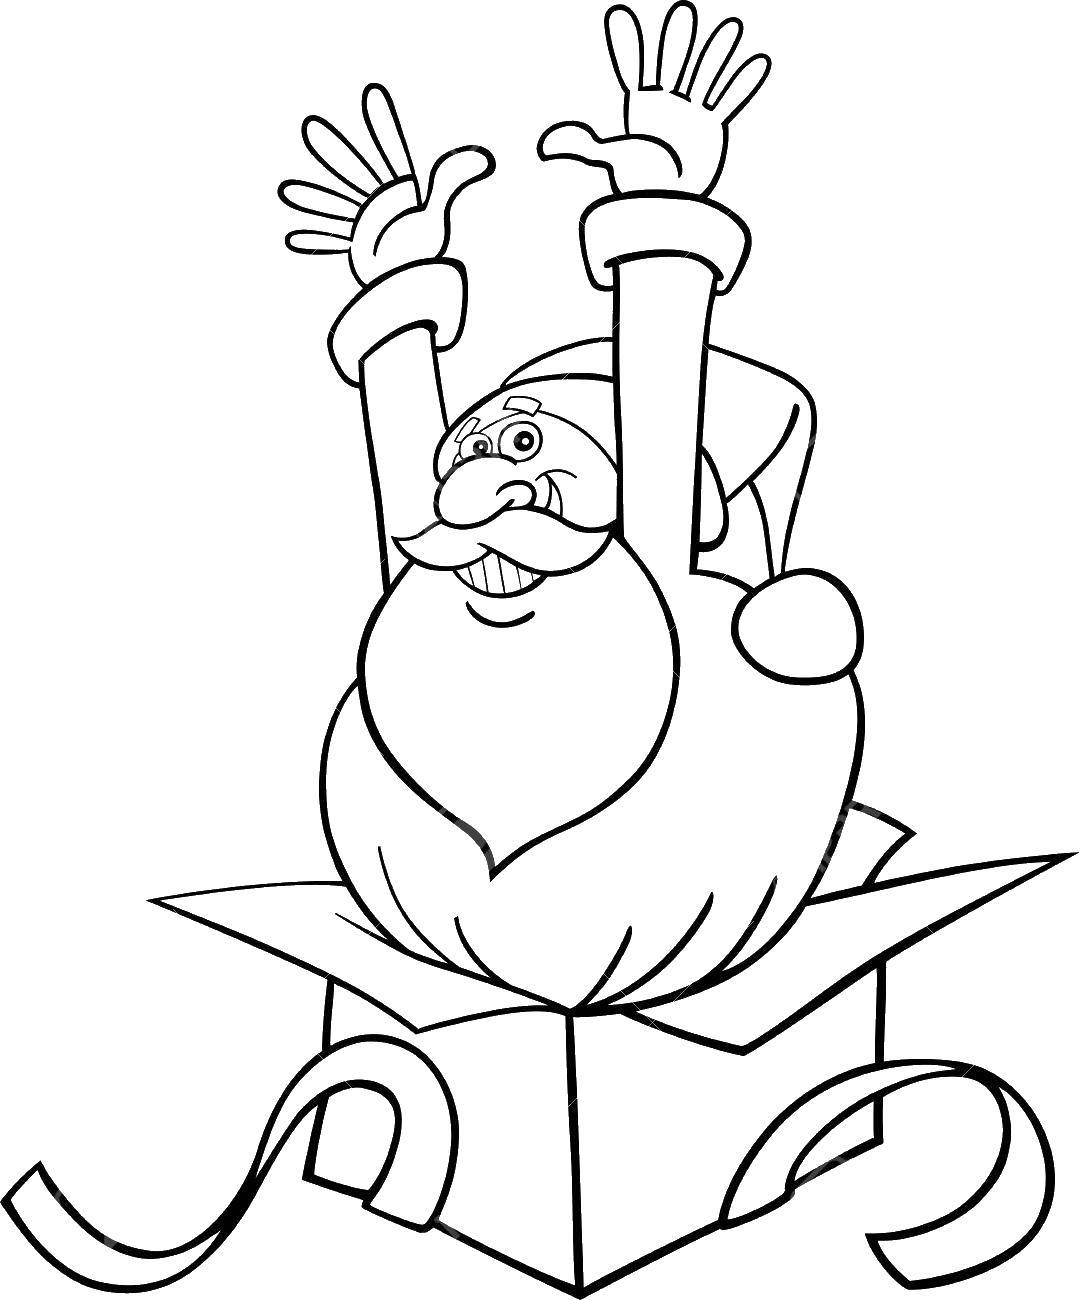 Coloring Santa Claus in gift box. Category coloring. Tags:  Santa Claus in box, .